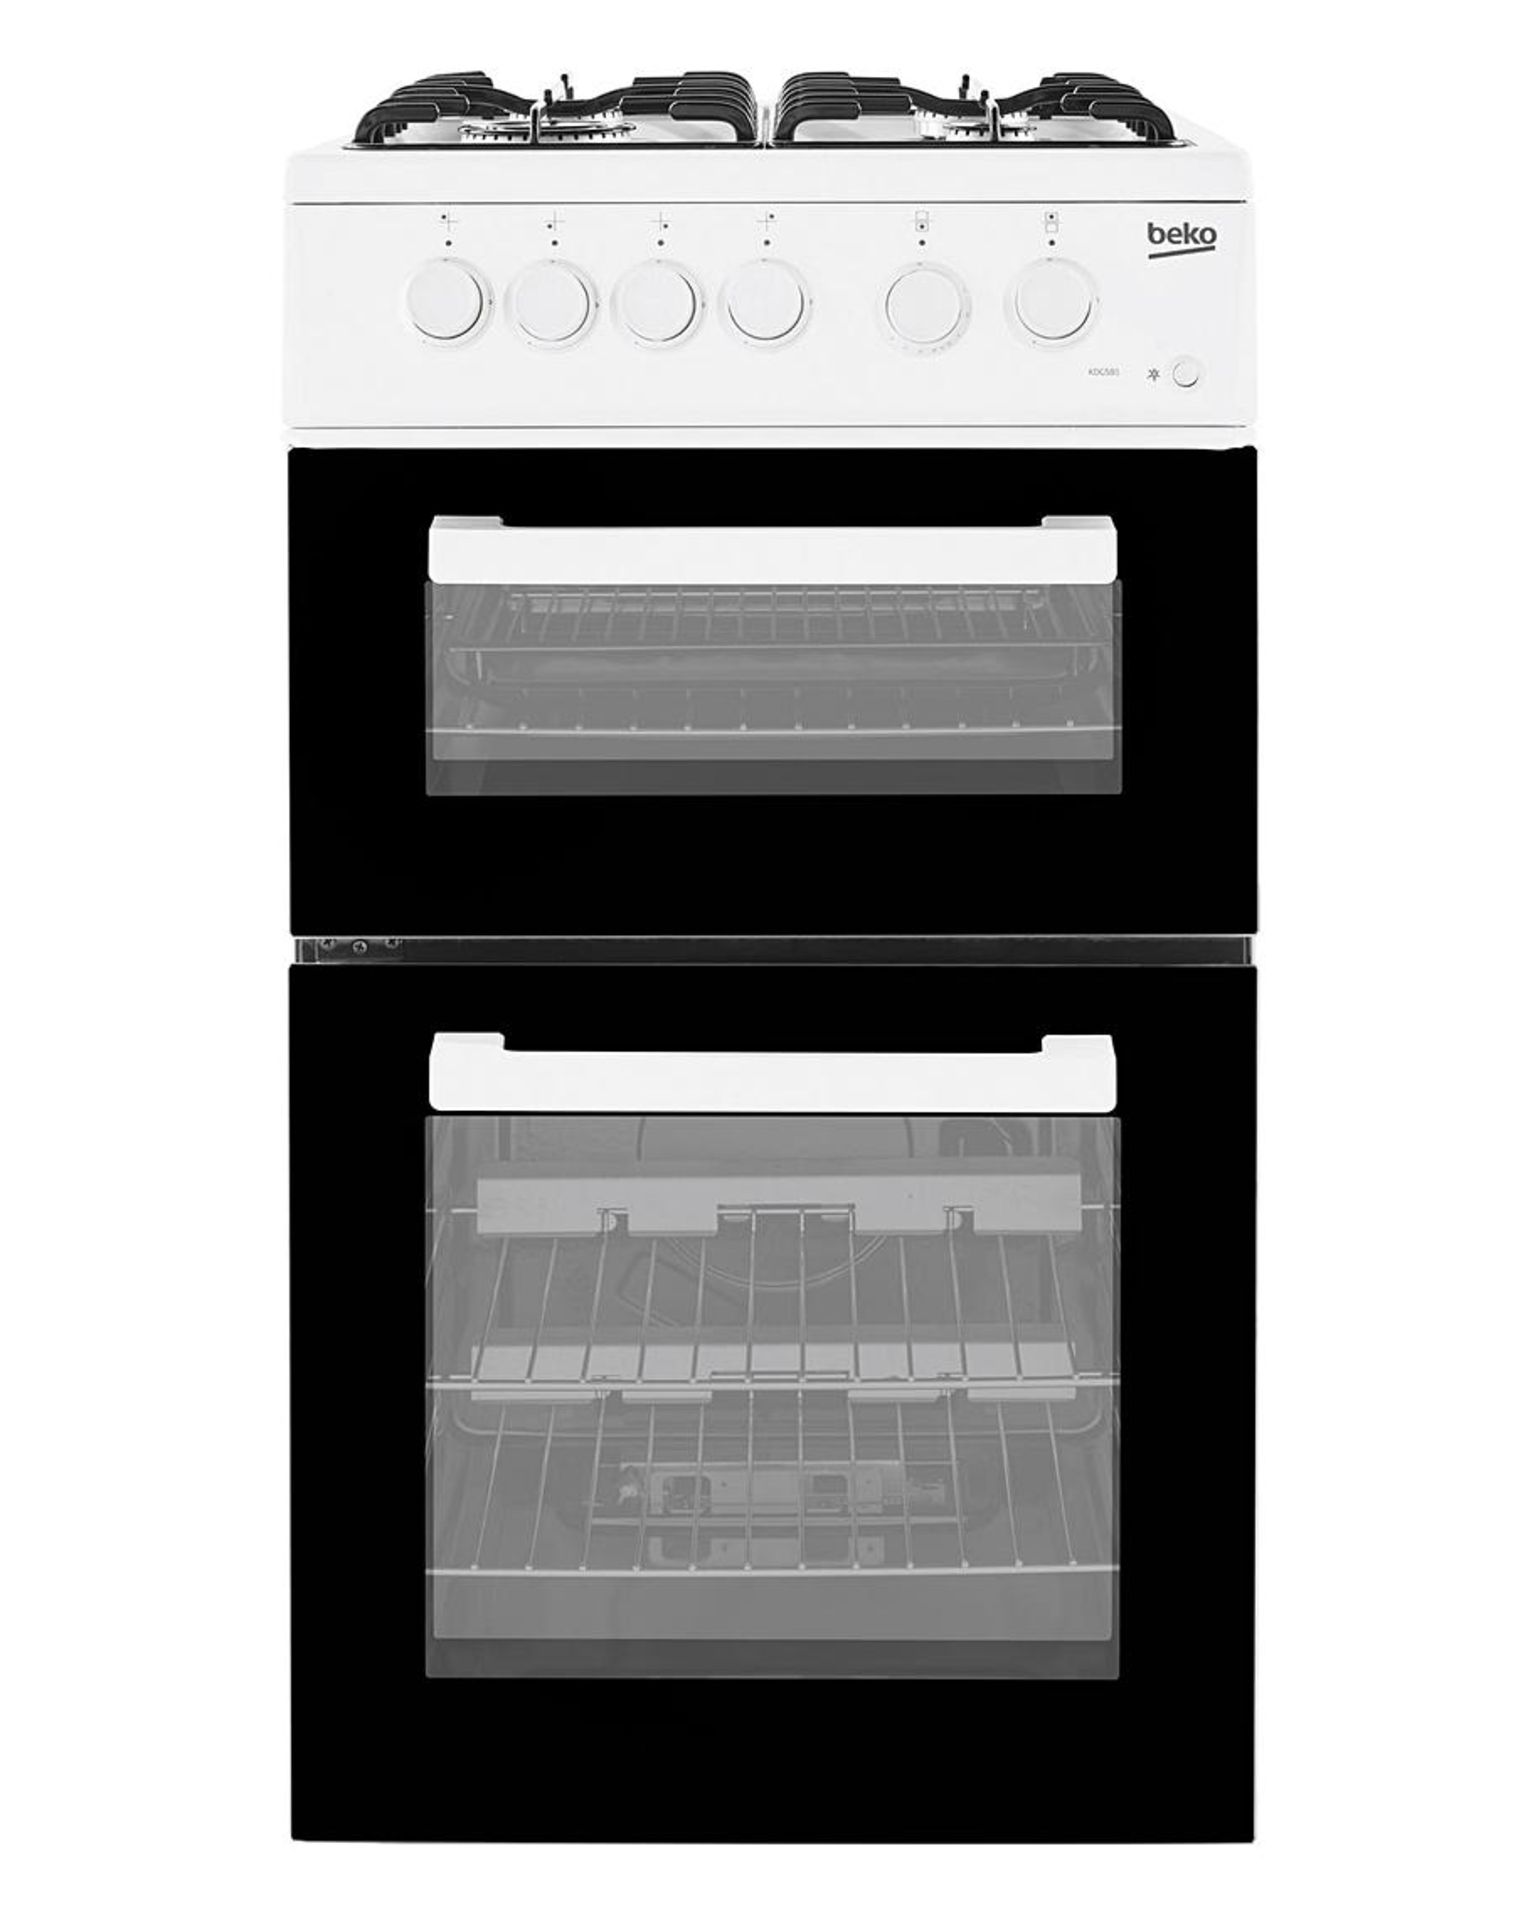 Beko KDG581W Freestanding Gas Cooker with Gas Grill - White. RRP £699.99. Cooking for your family is